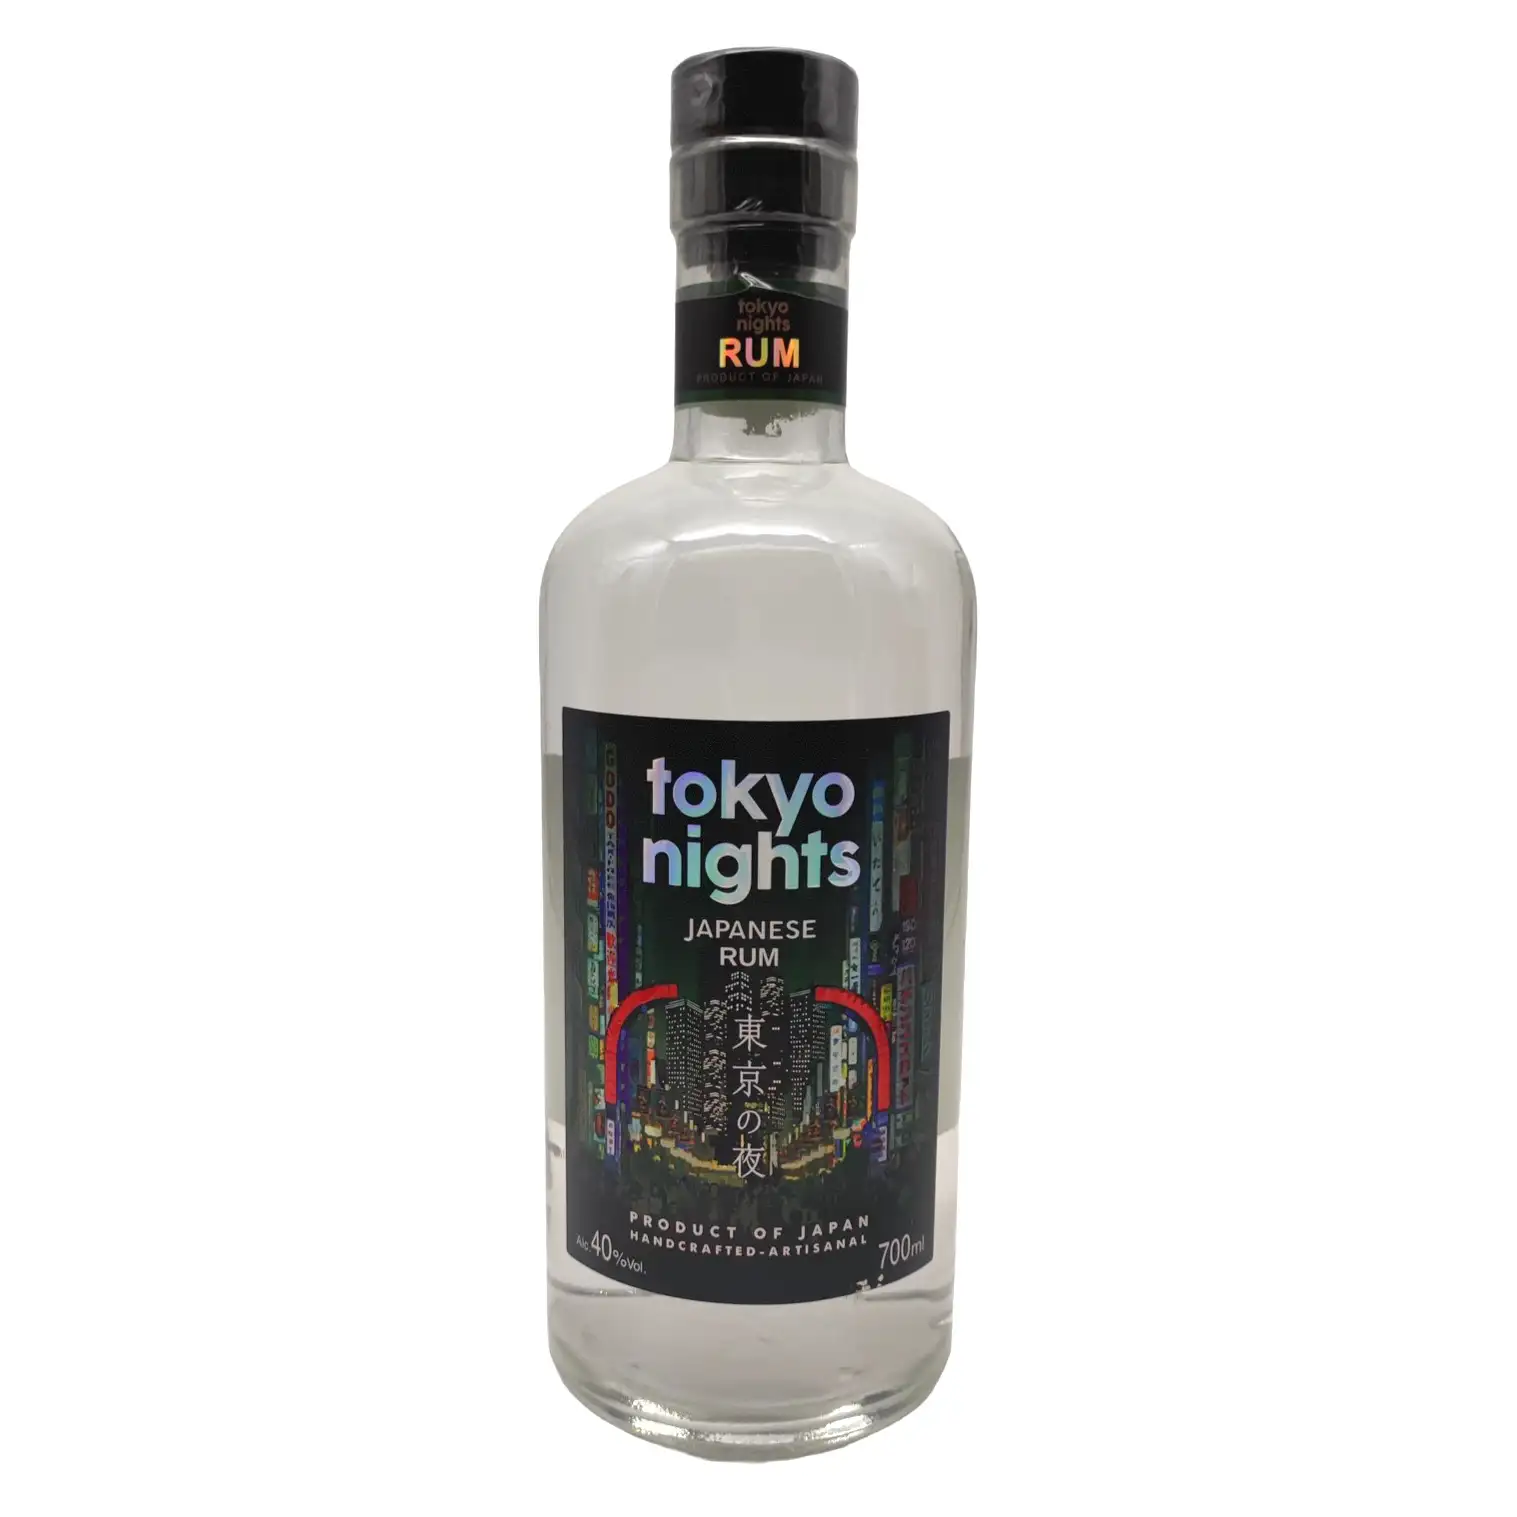 Image of the front of the bottle of the rum Tokyo Nights (Japanese Rums)